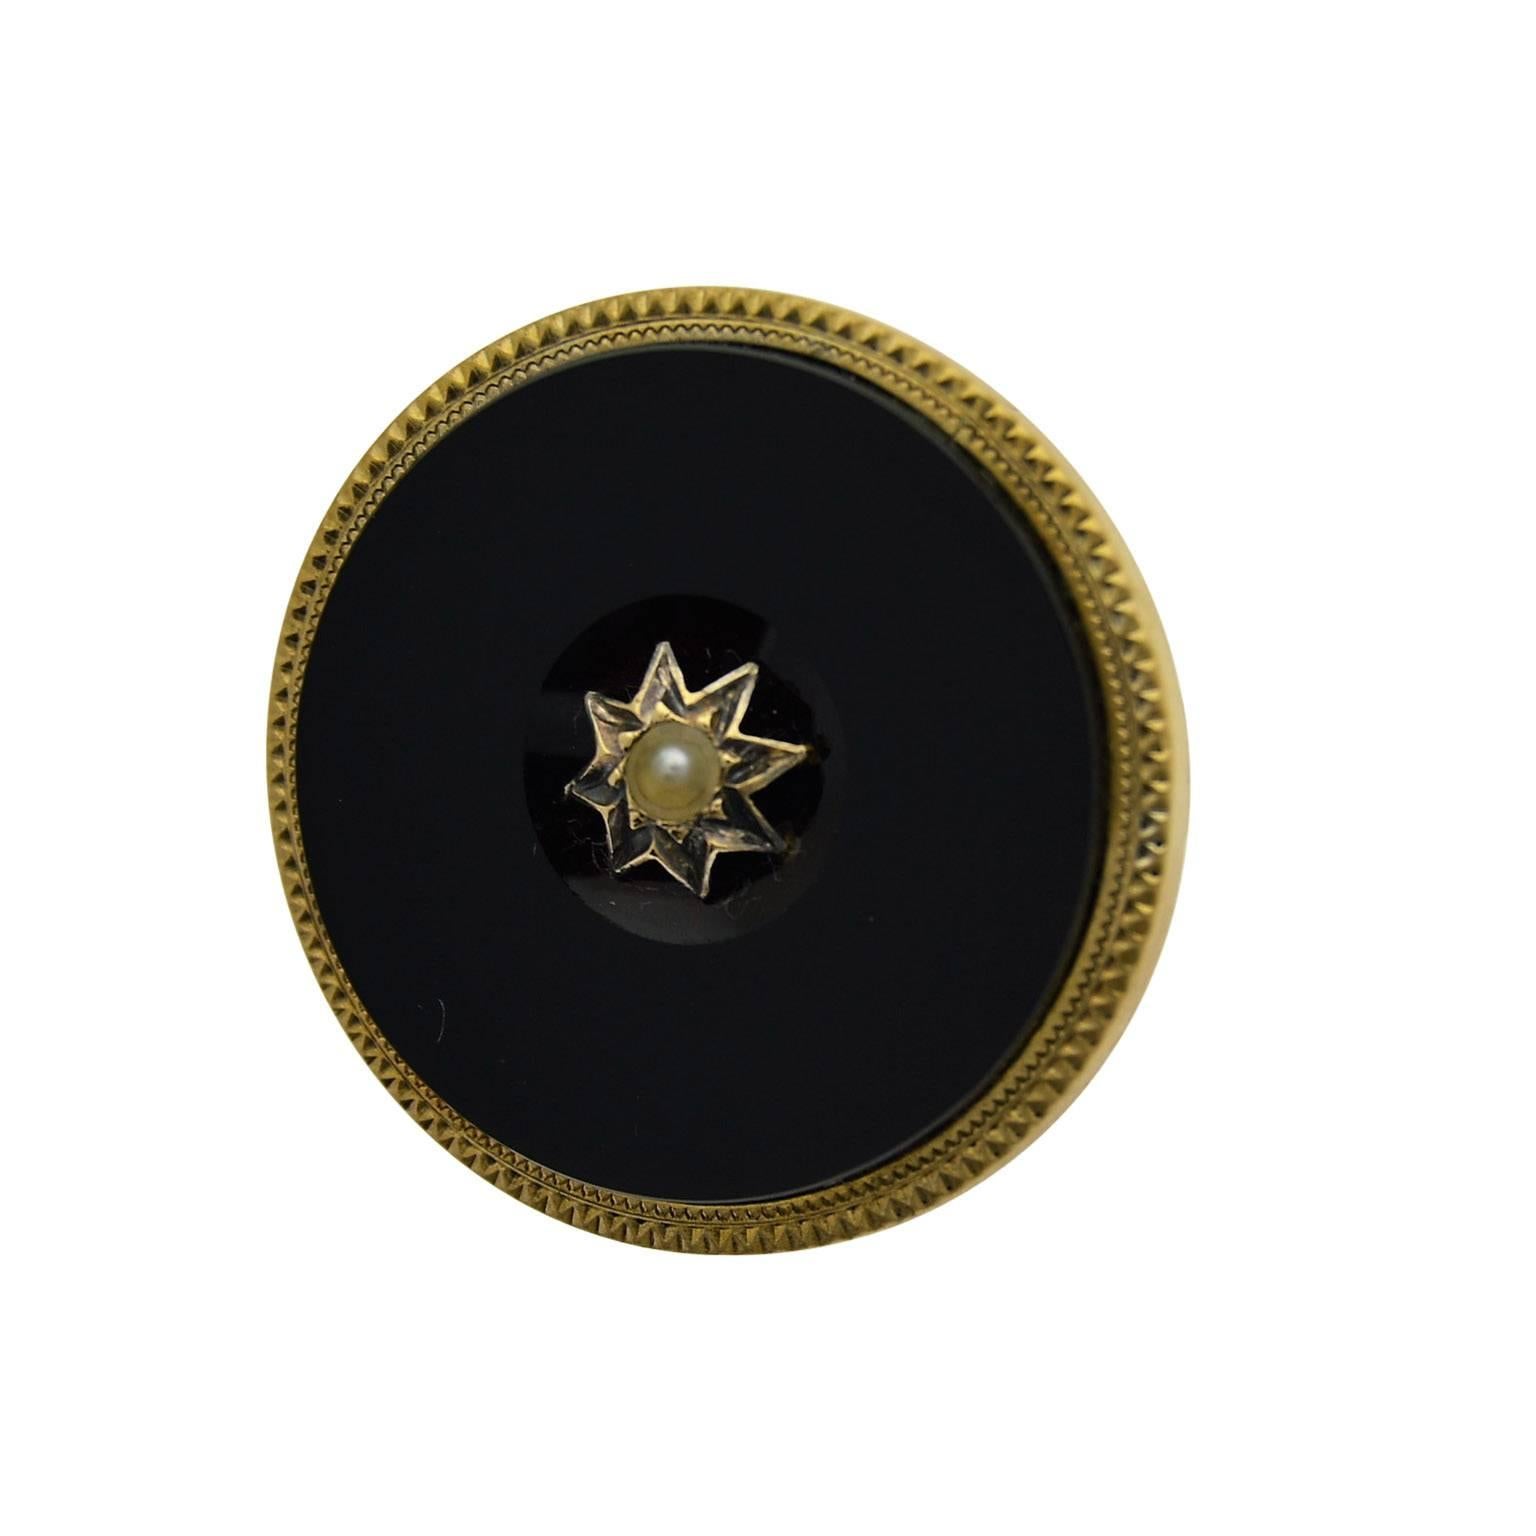 This 30mm diameter onyx pin has a gold eight pointed star in the center and natural pearl inset.
The piece is in excellent condition and entirely hand constructed.
There are no chips or scratches on the face of the stone.
It is sophisticated and